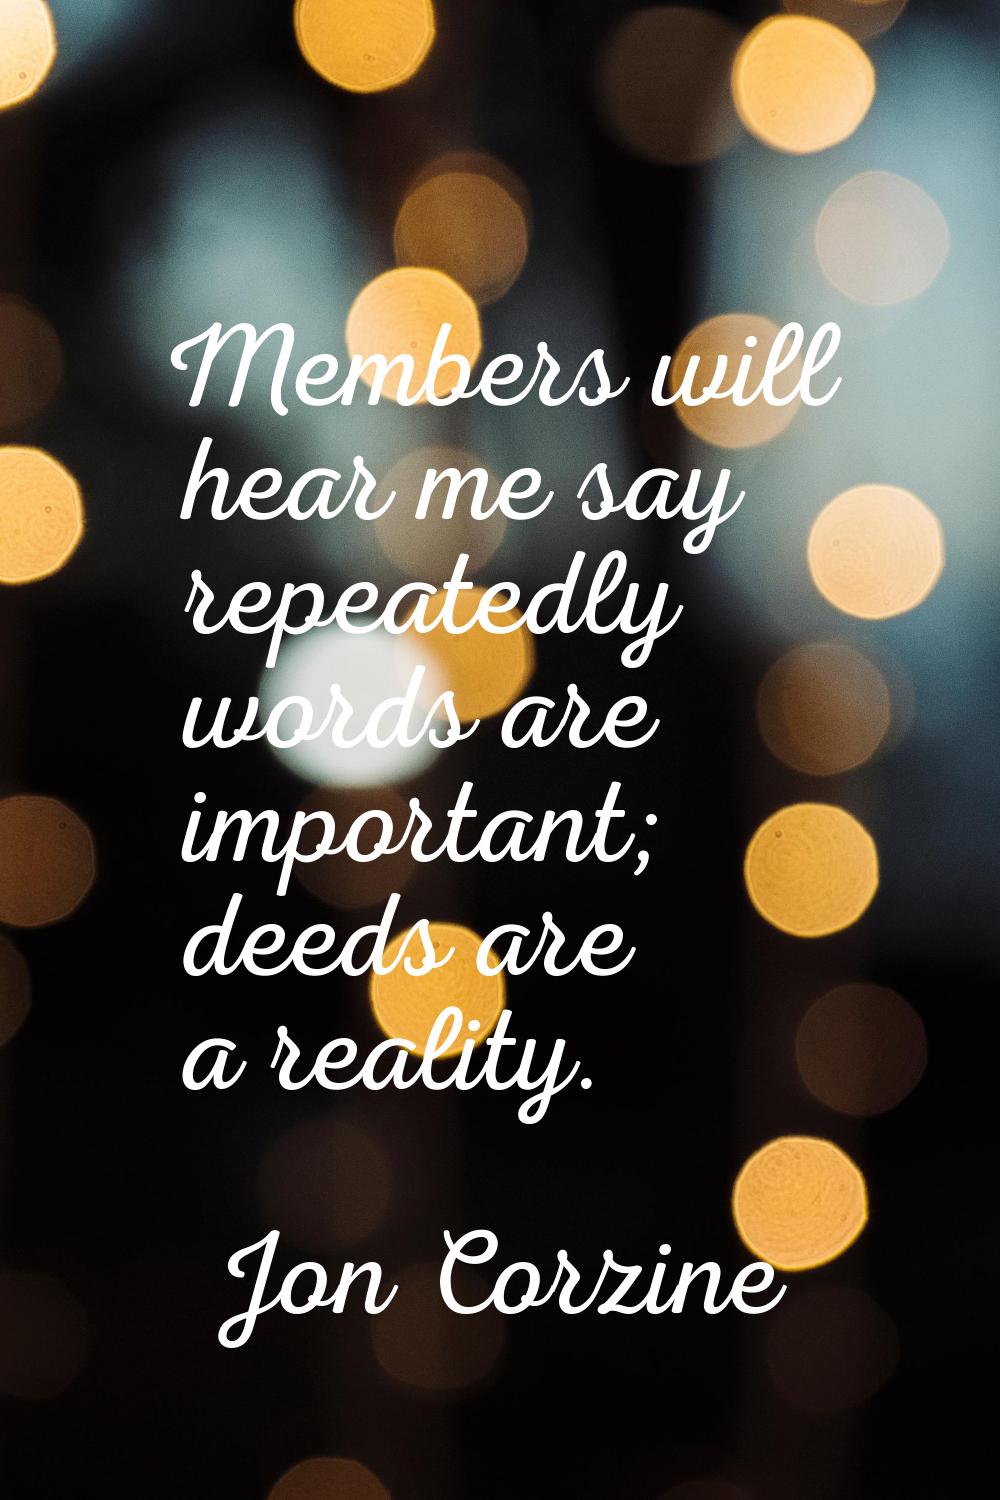 Members will hear me say repeatedly words are important; deeds are a reality.